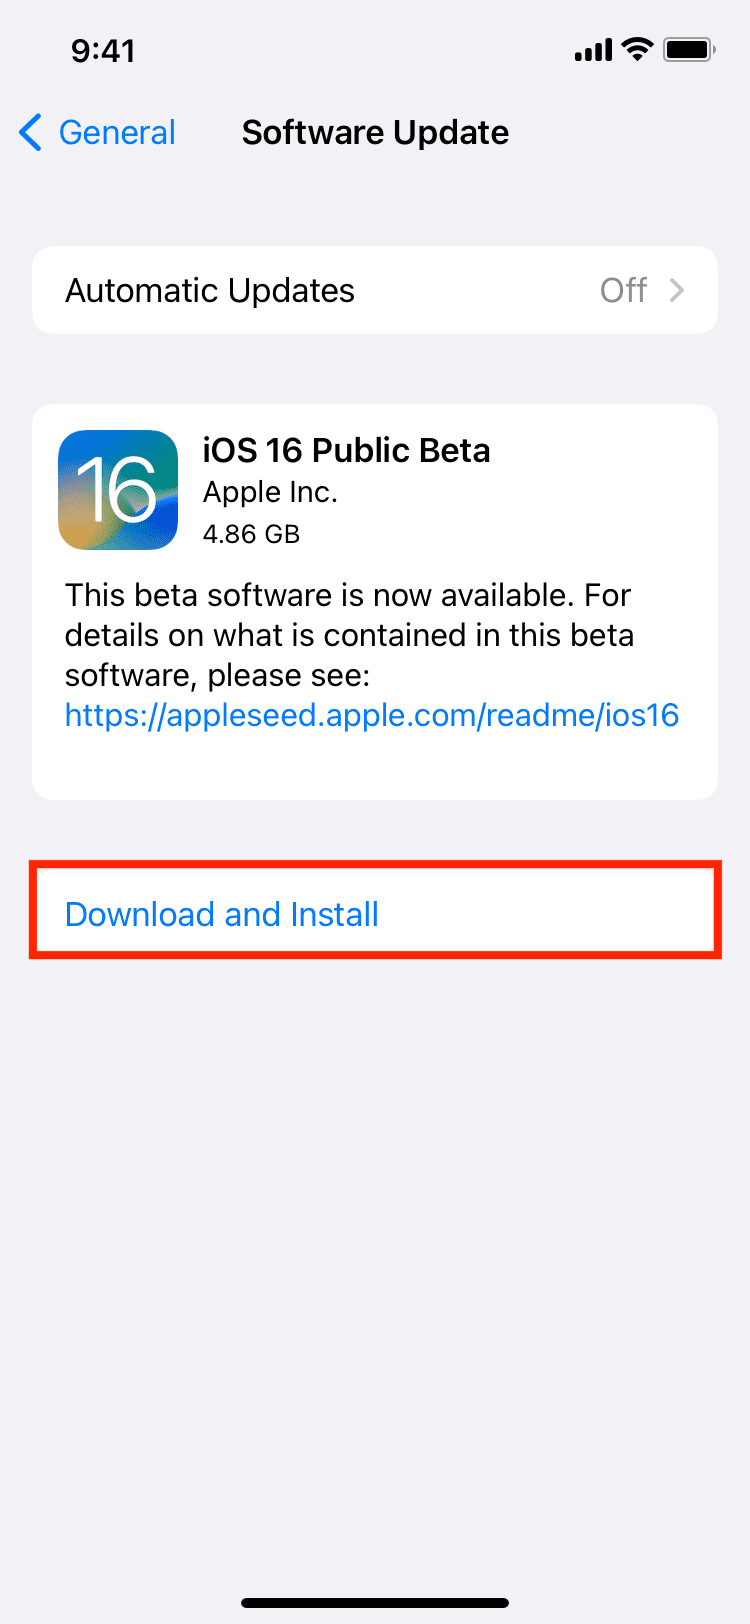 Scroll down and select Software update.
Tap Download and install.